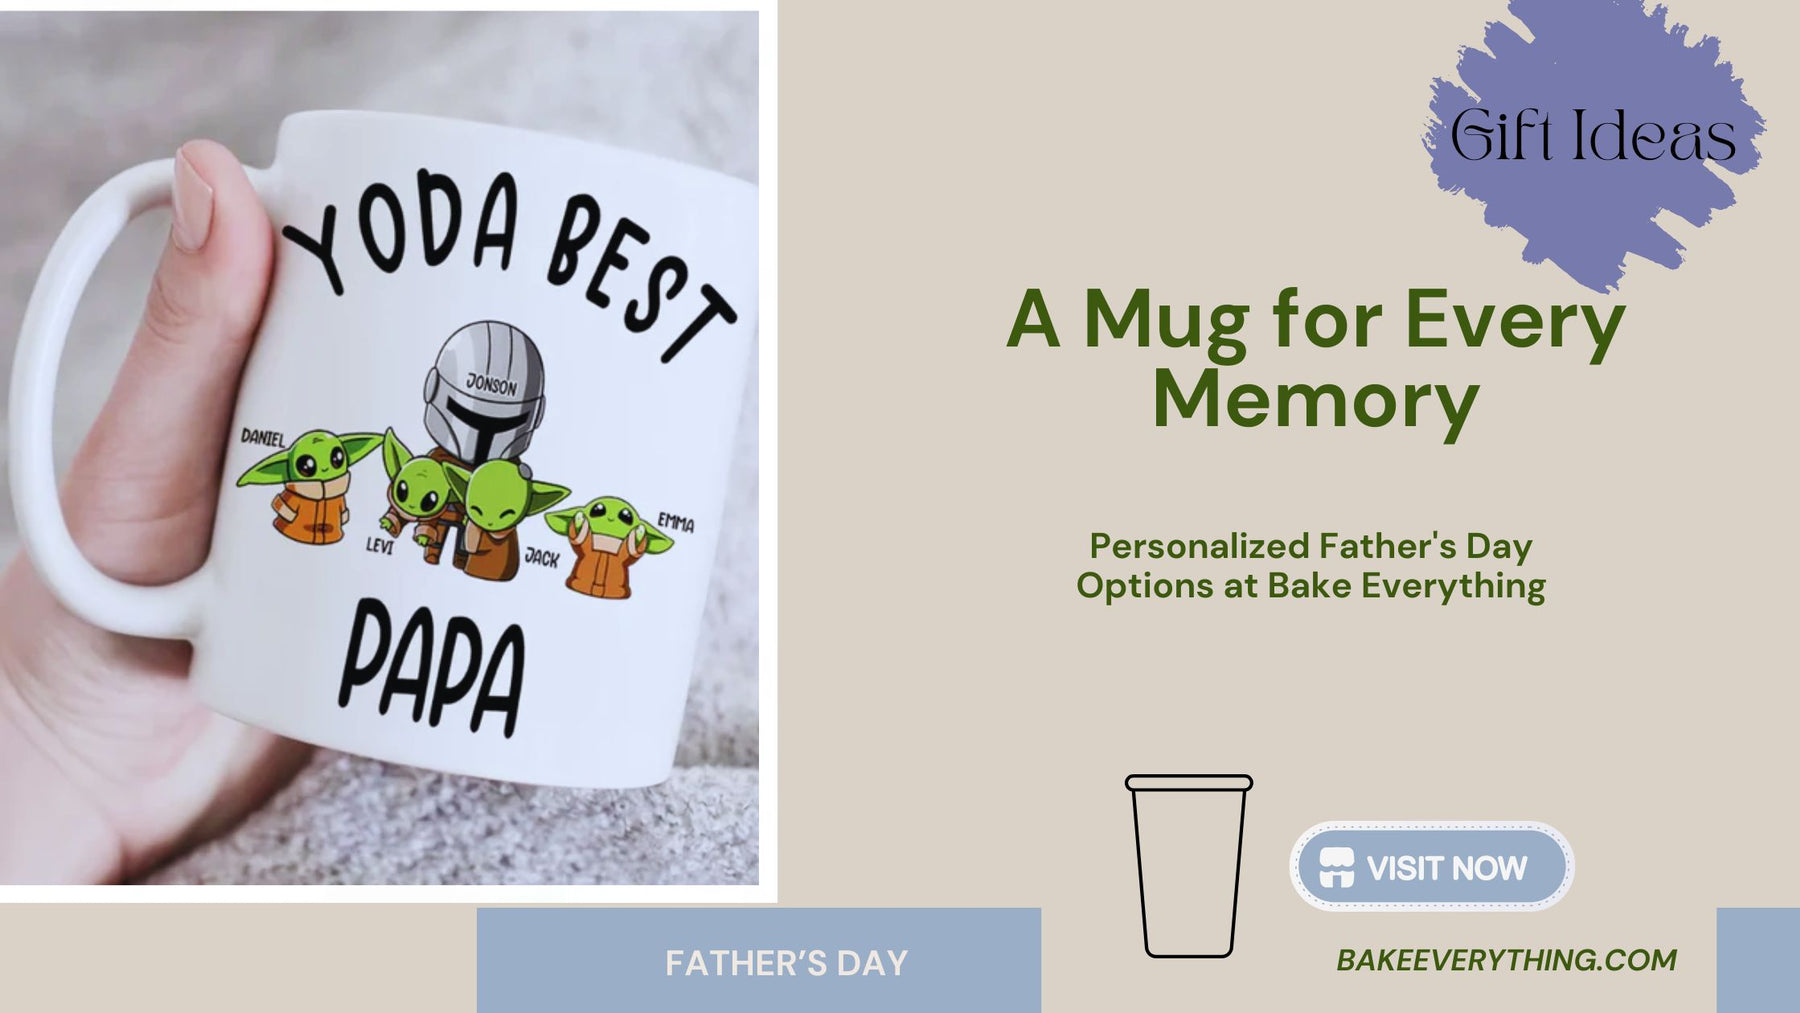 A Mug for Every Memory: Personalized Father's Day Options at Bake Everything